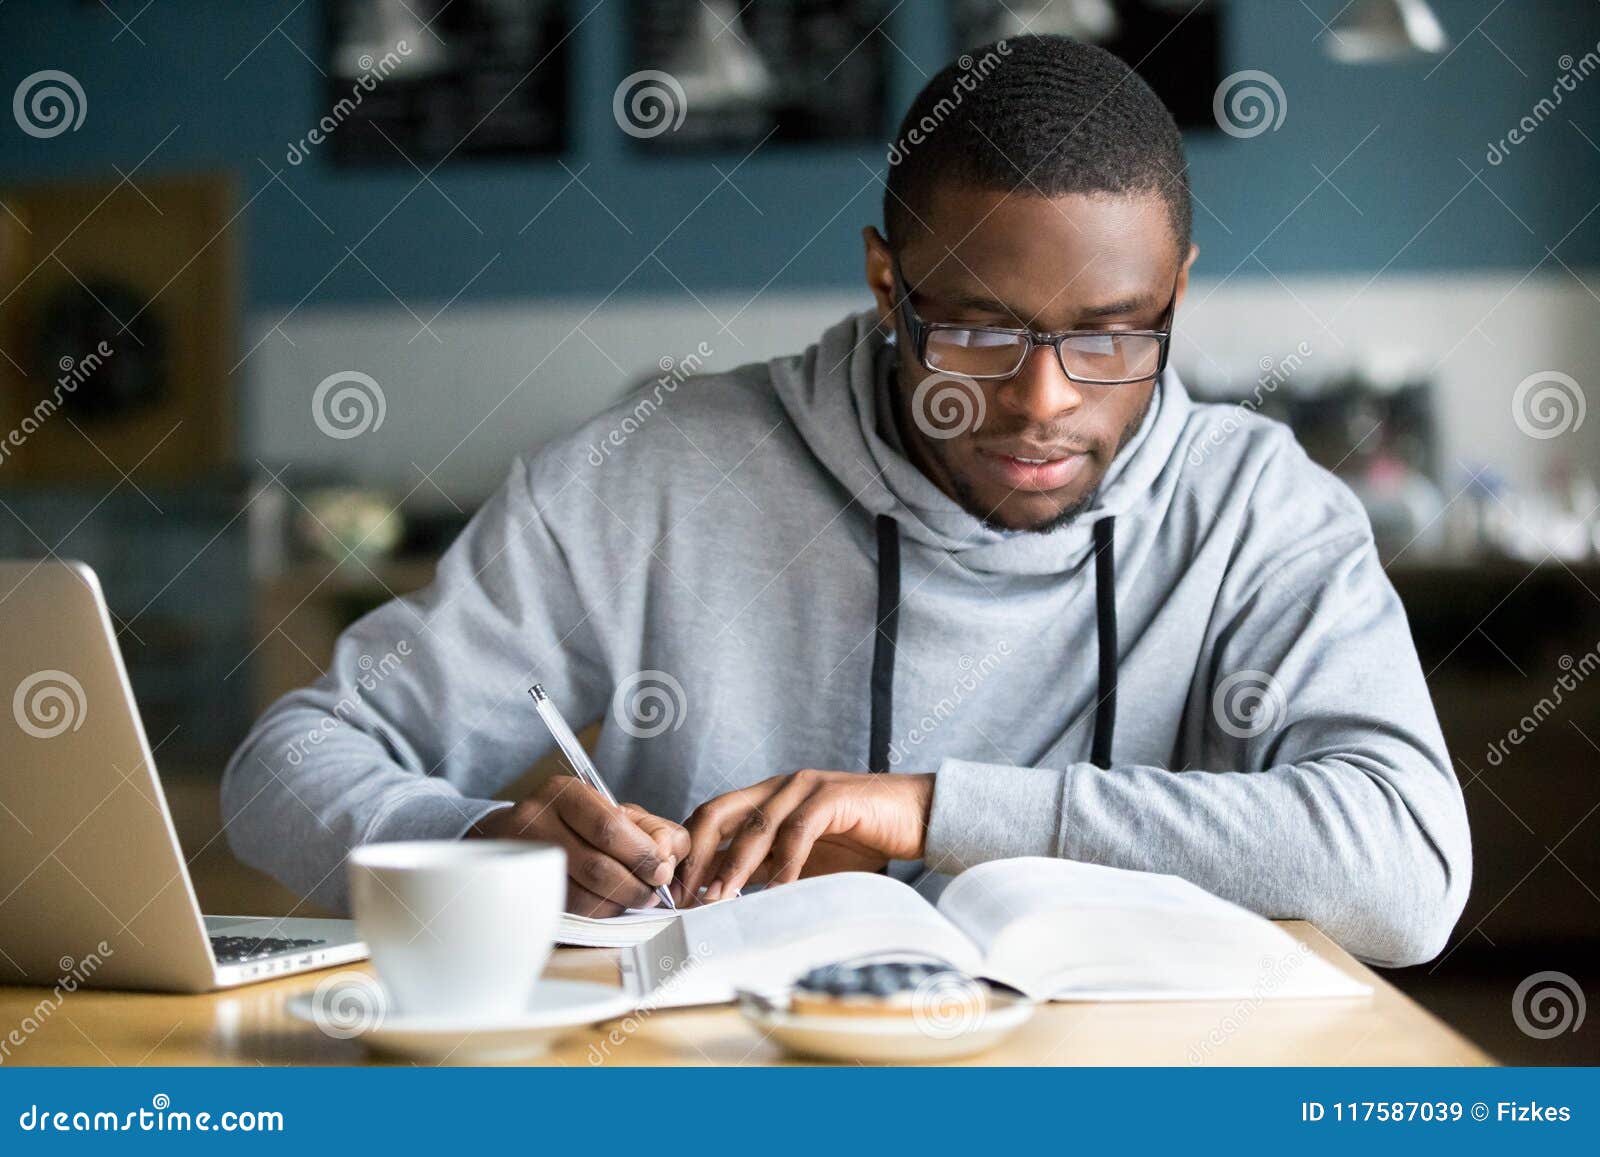 focused millennial african student making notes while studying i